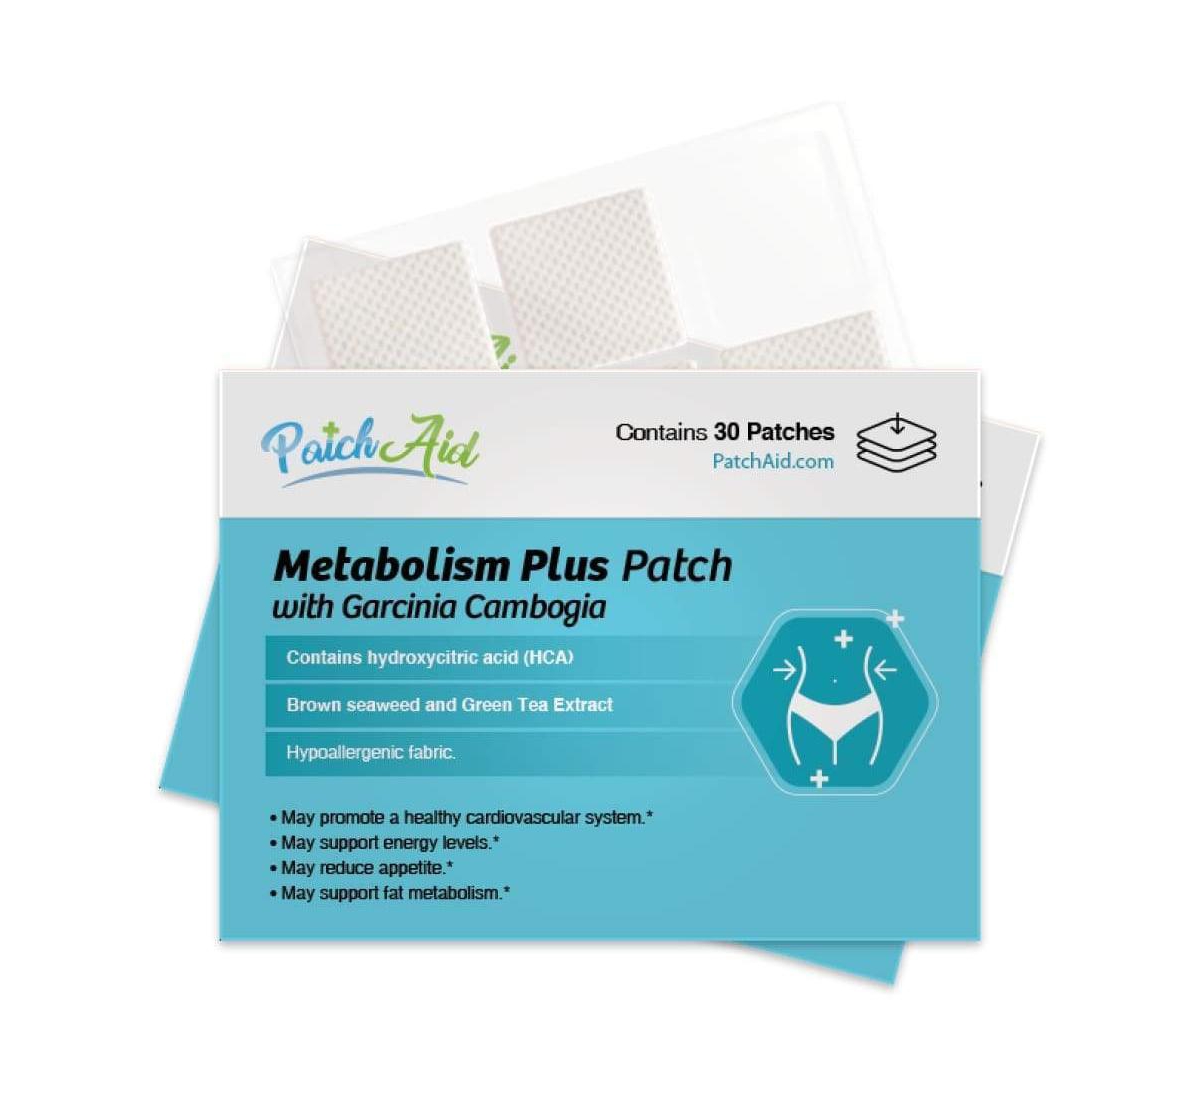 Metabolism Plus with Garcinia Cambogia Patch by PatchAid (30-Day Supply) - White